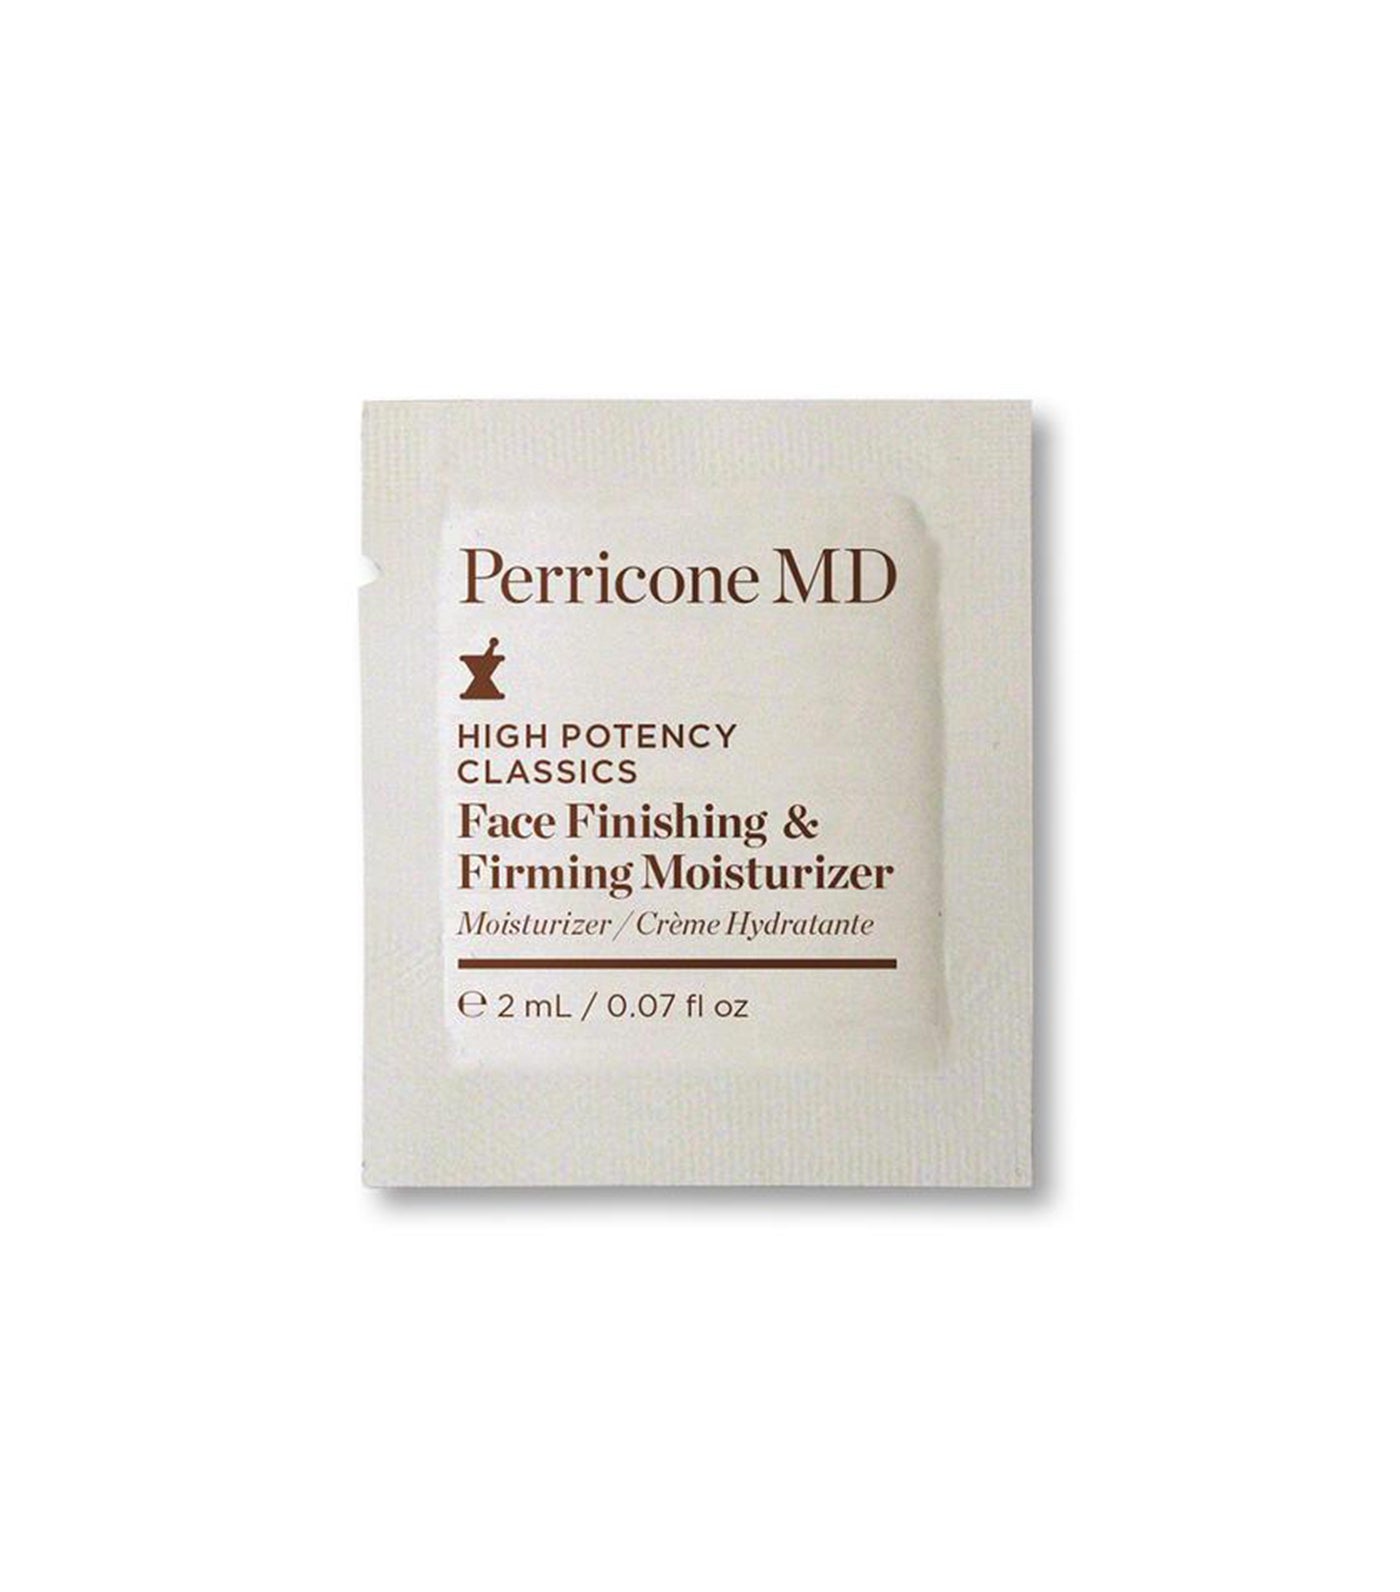 Perricone MD Free High Potency Classics Face Finishing and Firming Moisturizer Packet